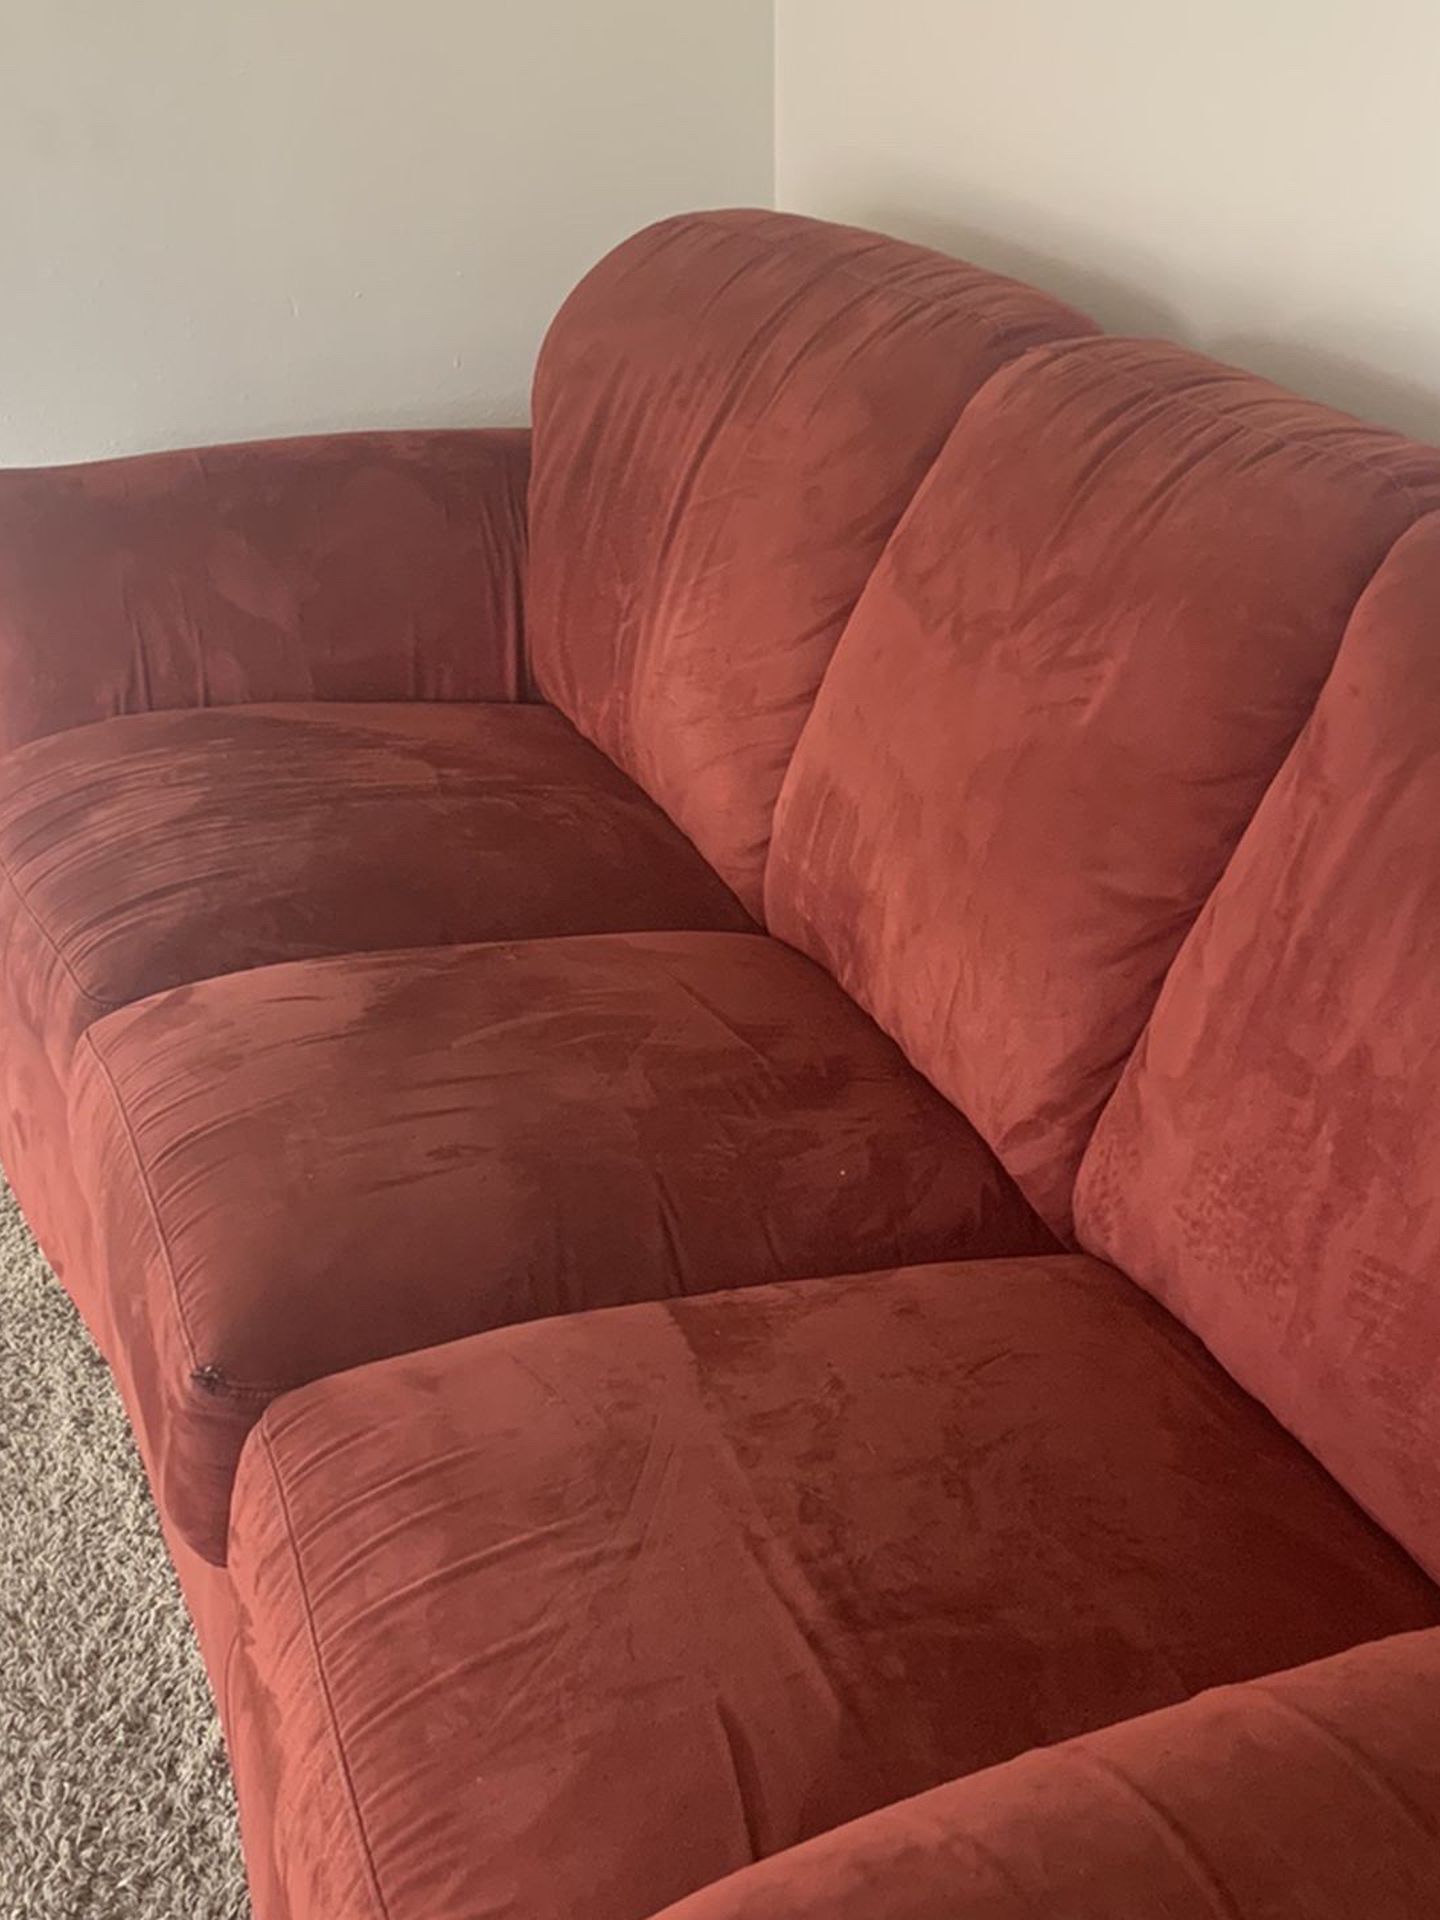 Couches For Sale. NEED GONE ASAP